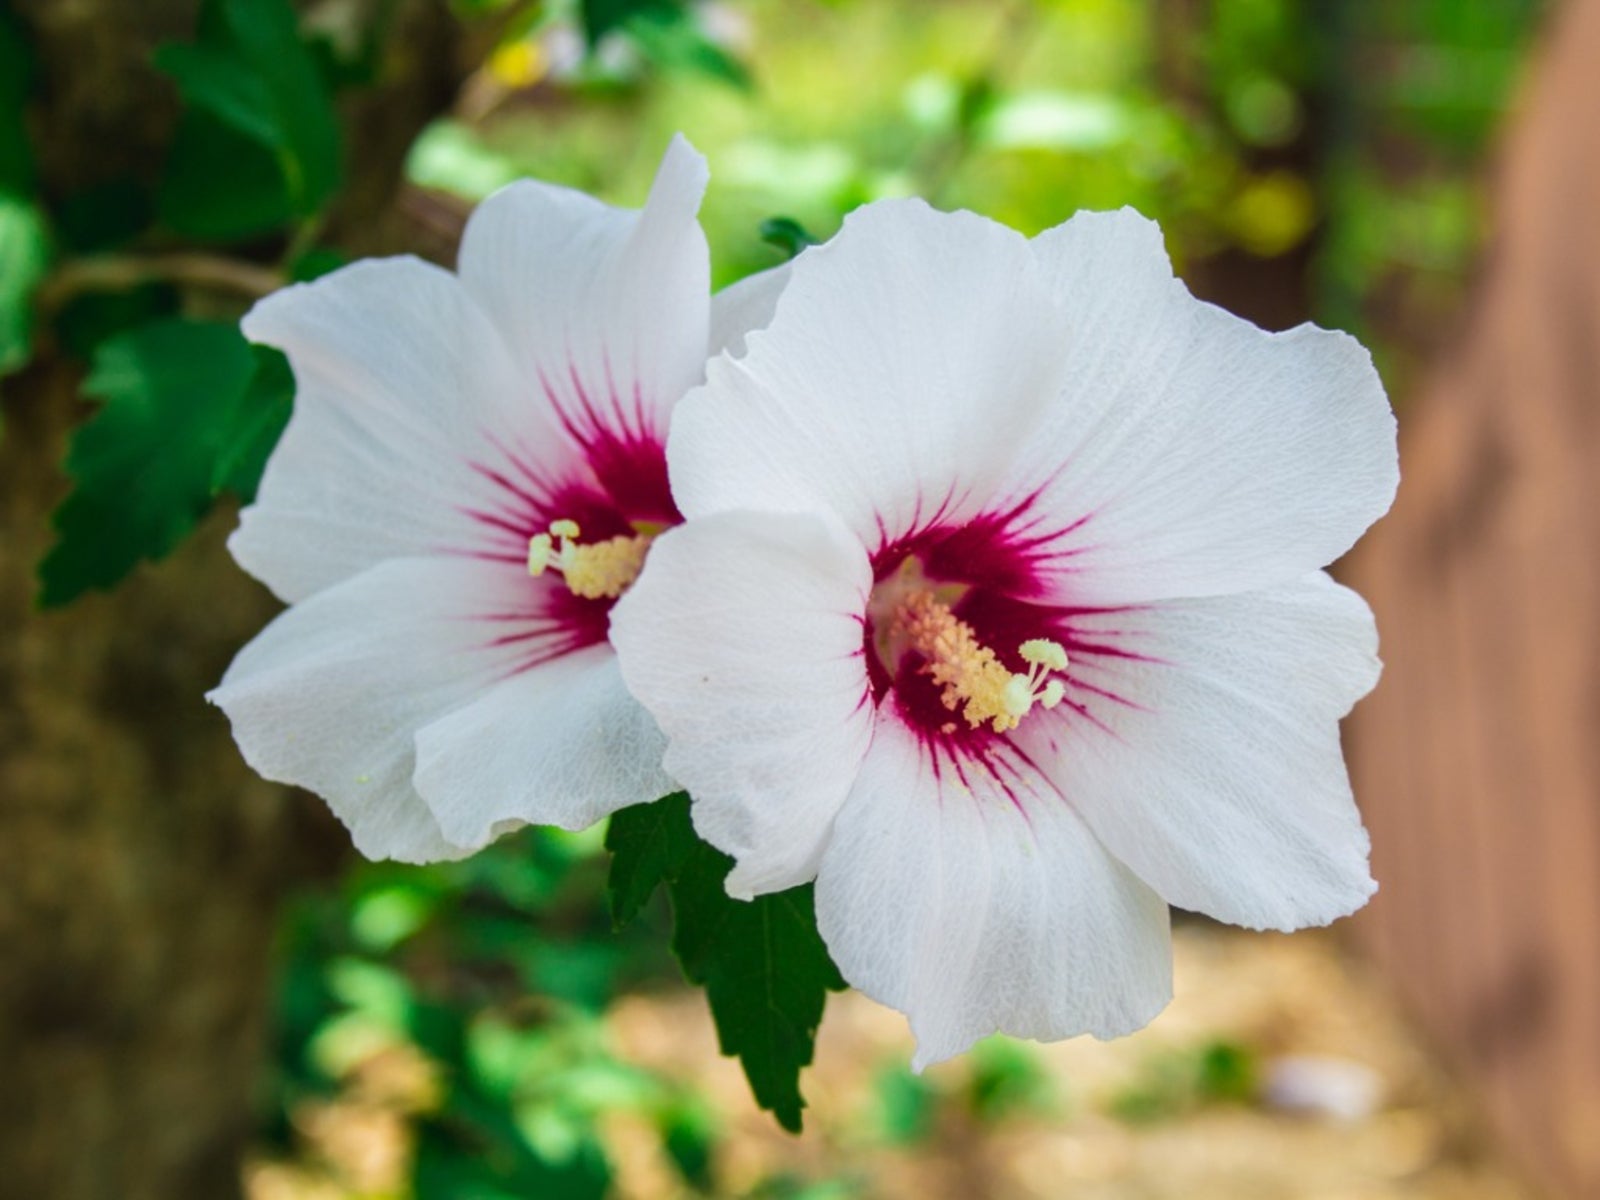 How to take care of rose of sharon plants